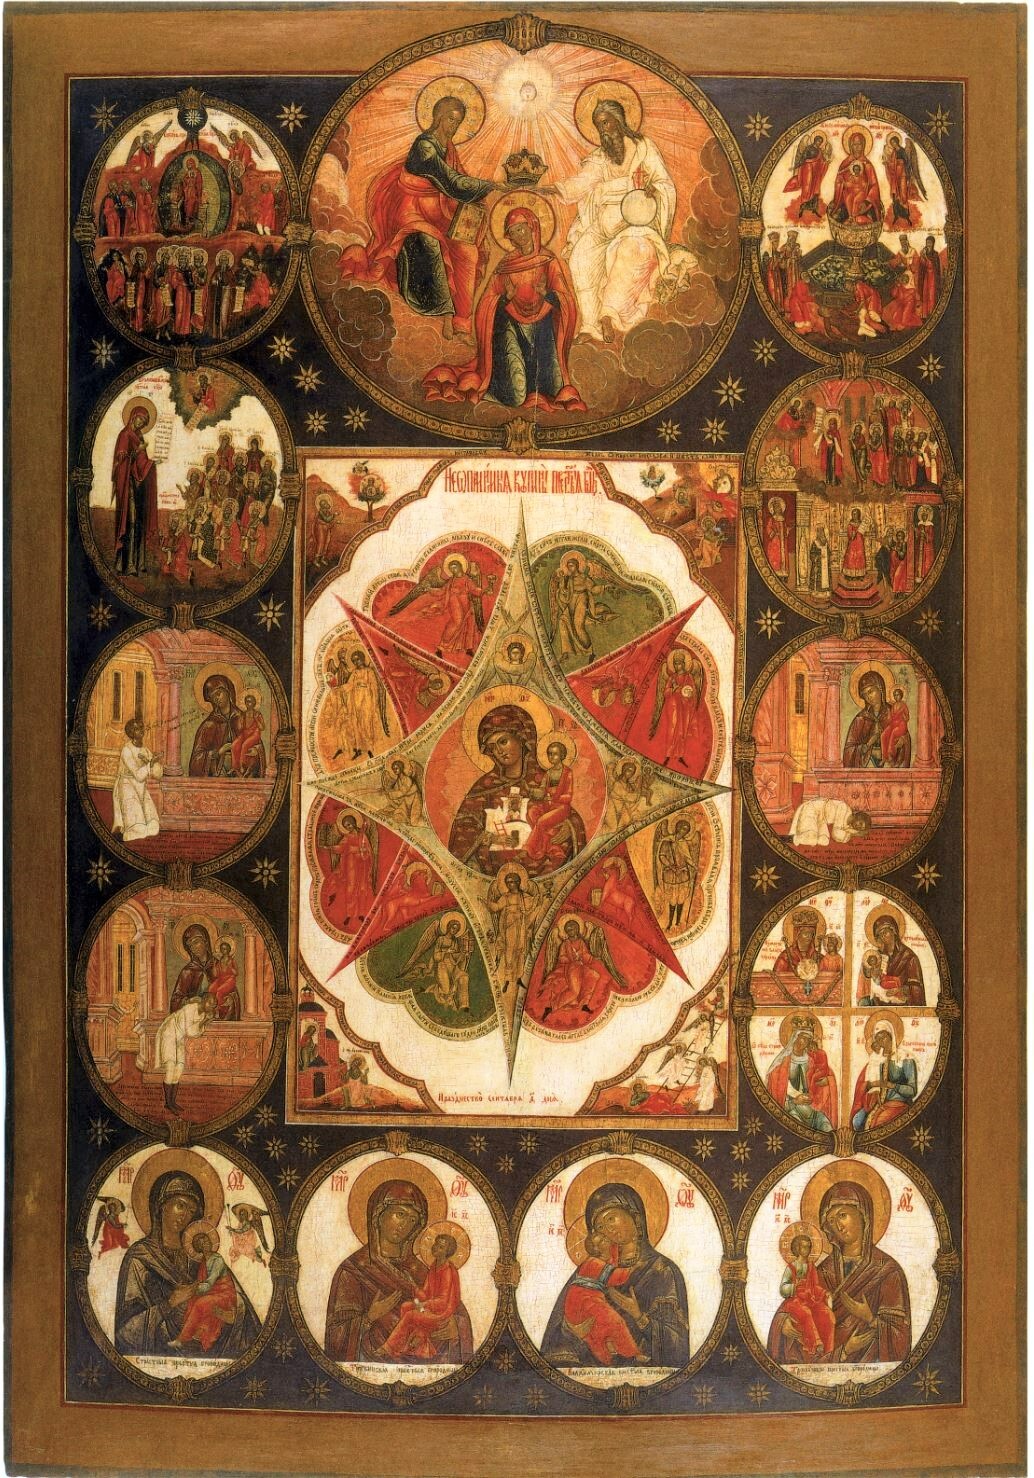 Wooden orthodox Icon of the Theotokos "Burning Bush" with icons of the Virgin Mary